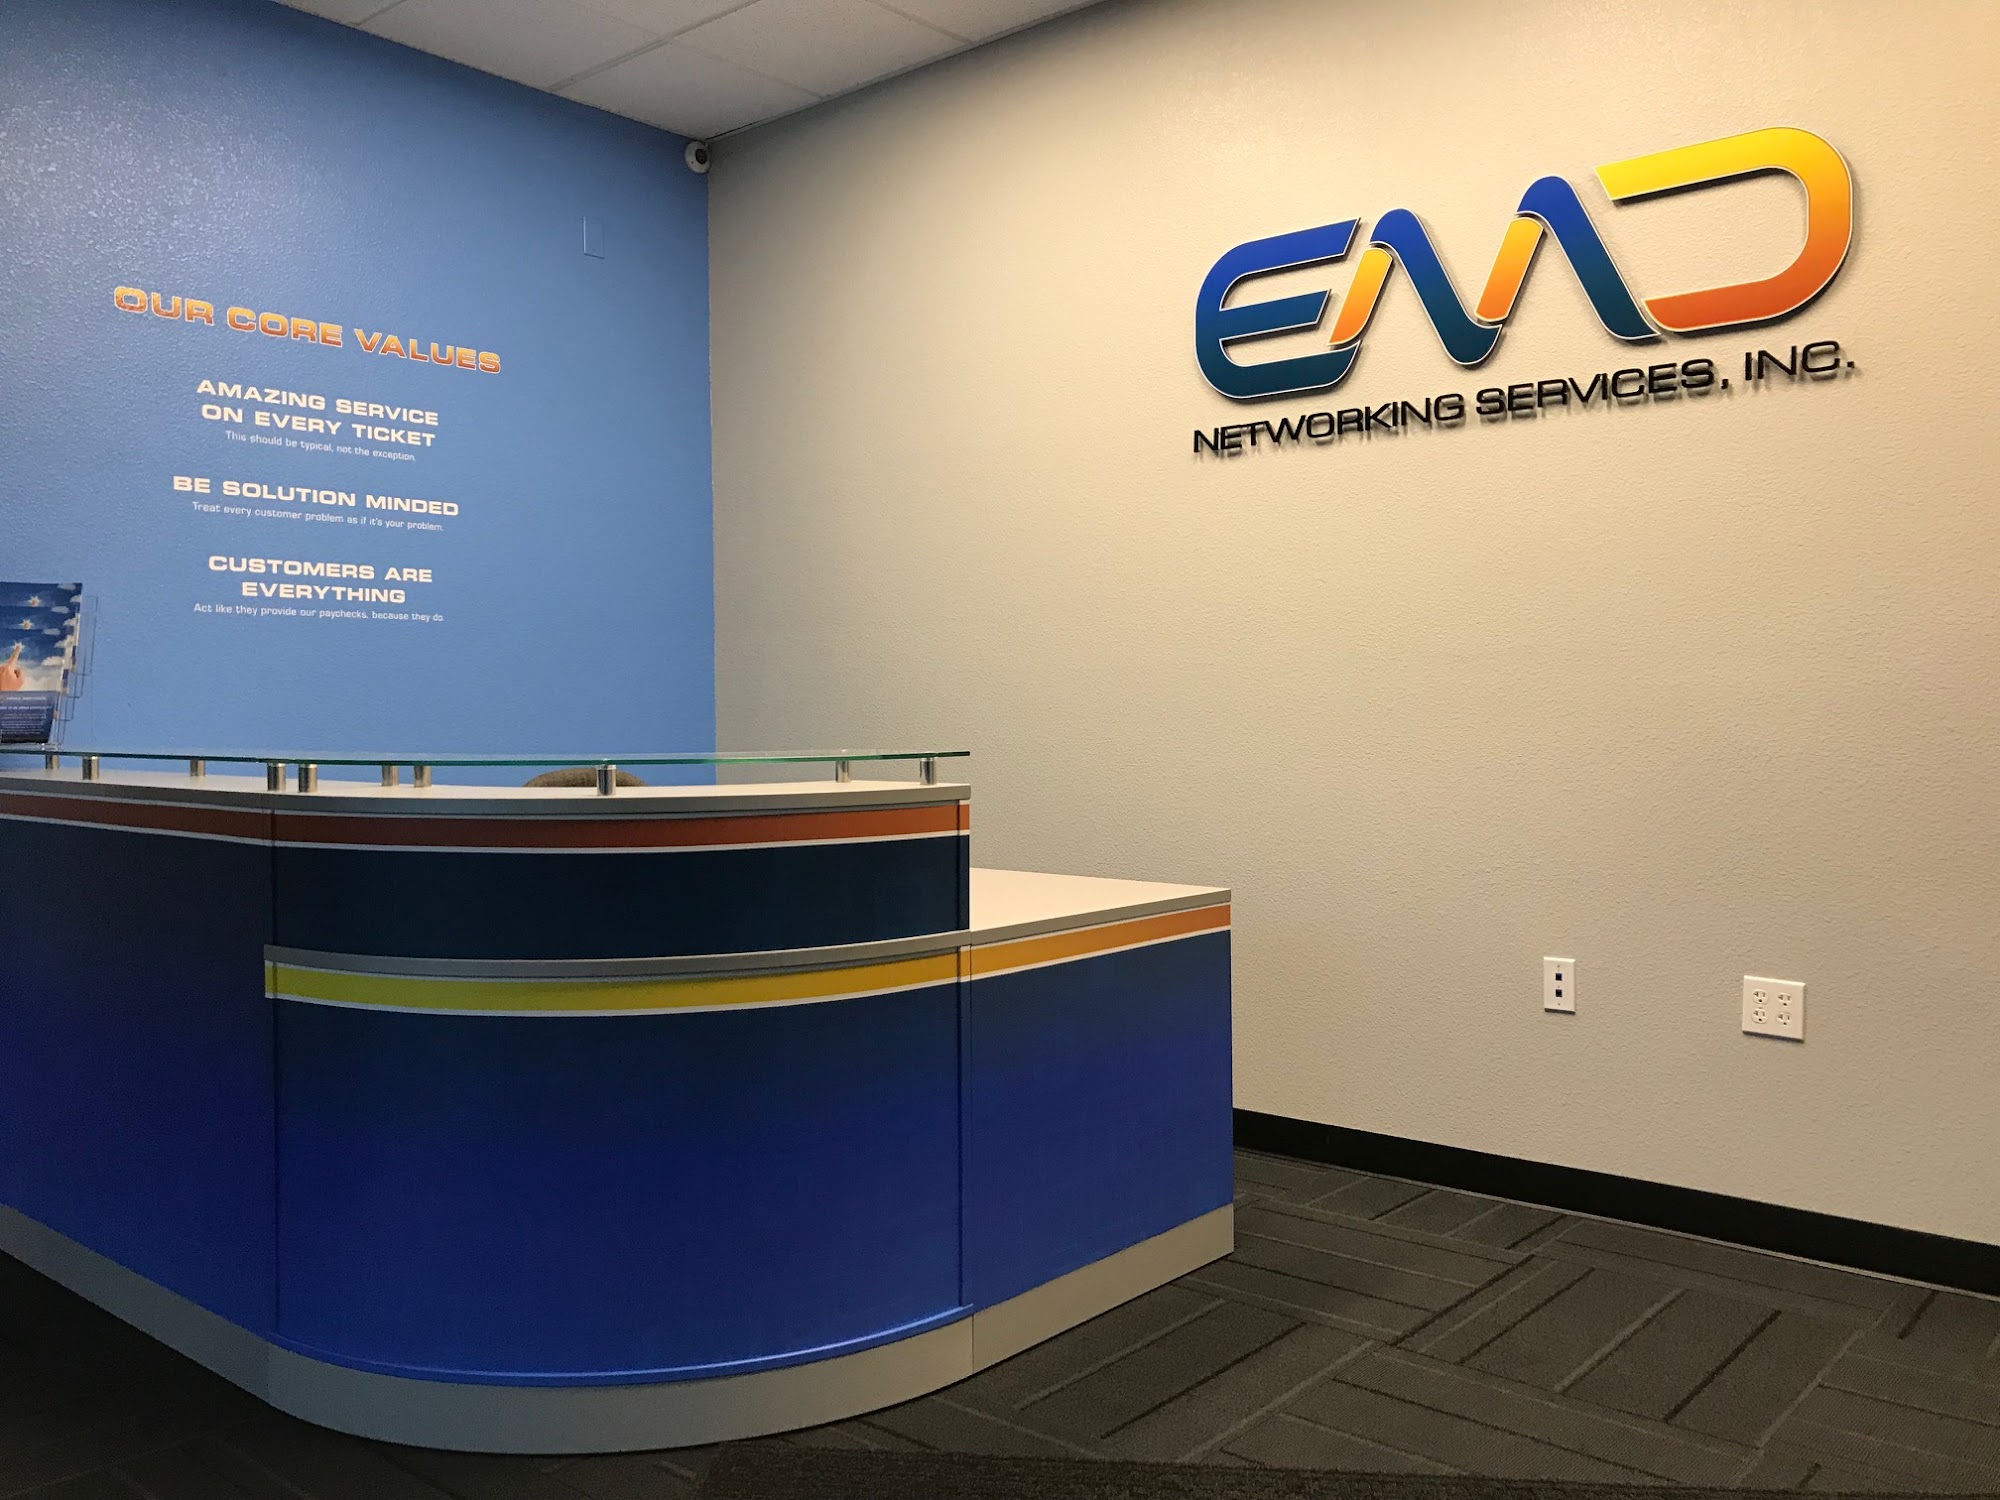 EMD Networking Services, Inc.